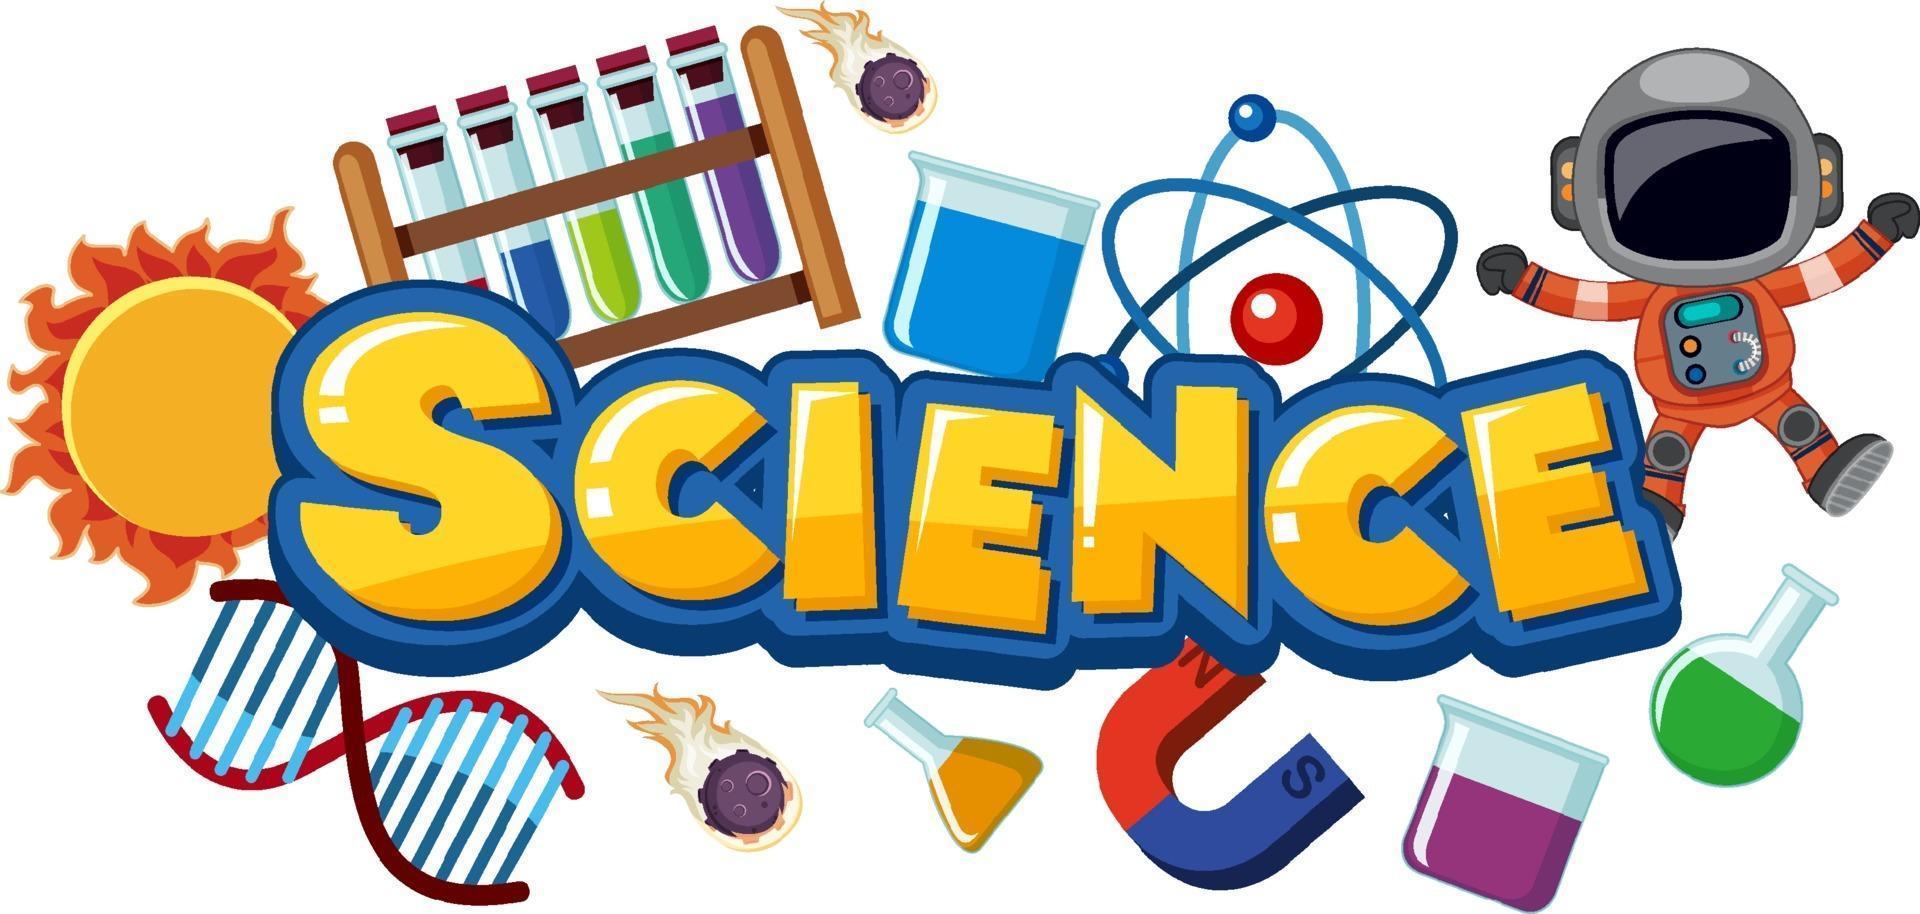 Science text icon with elements vector